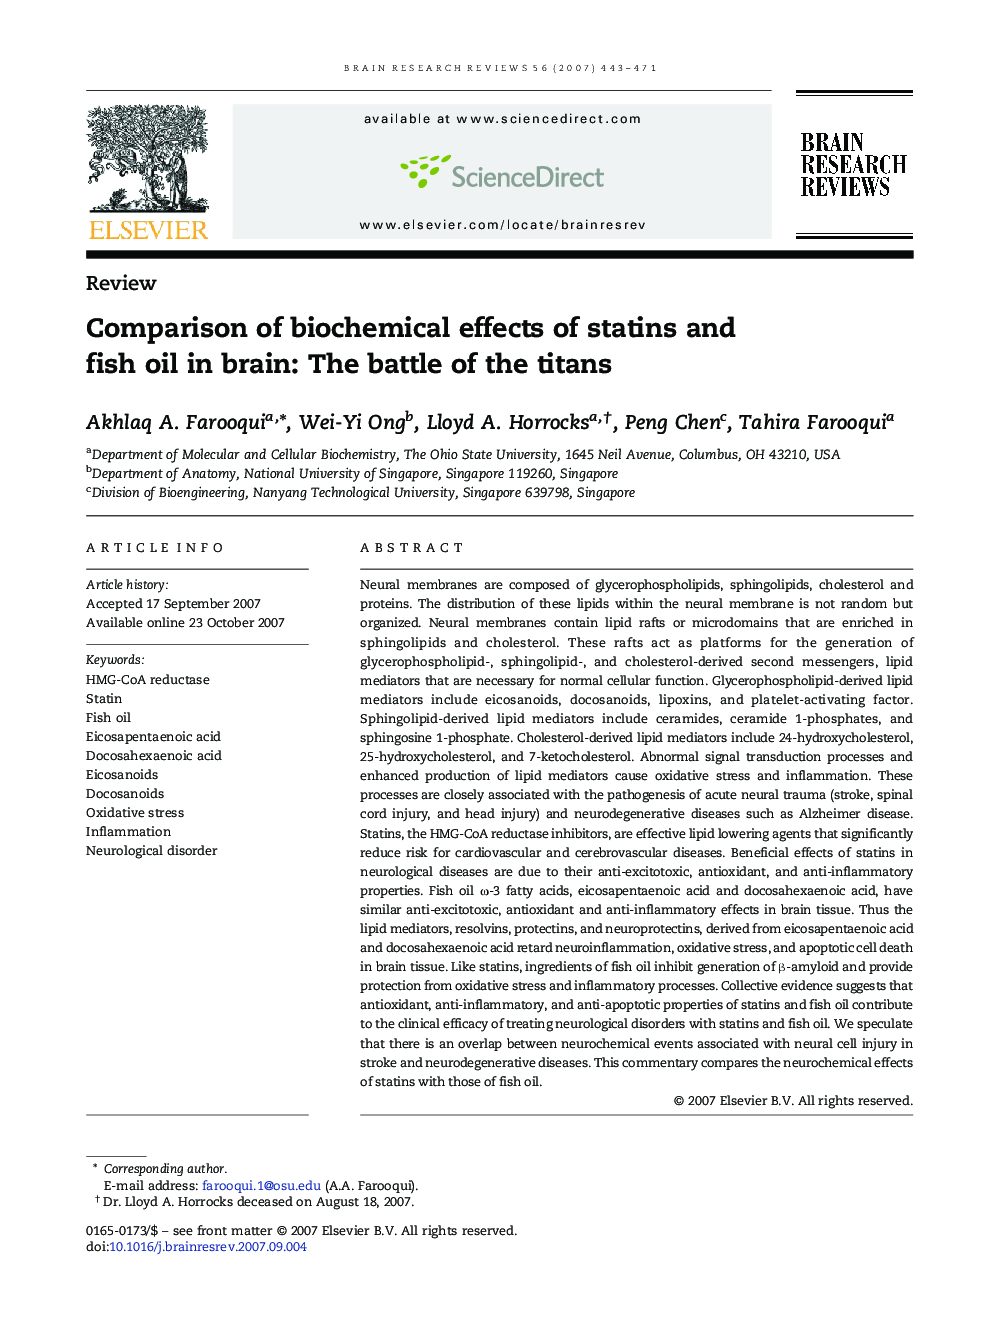 Comparison of biochemical effects of statins and fish oil in brain: The battle of the titans